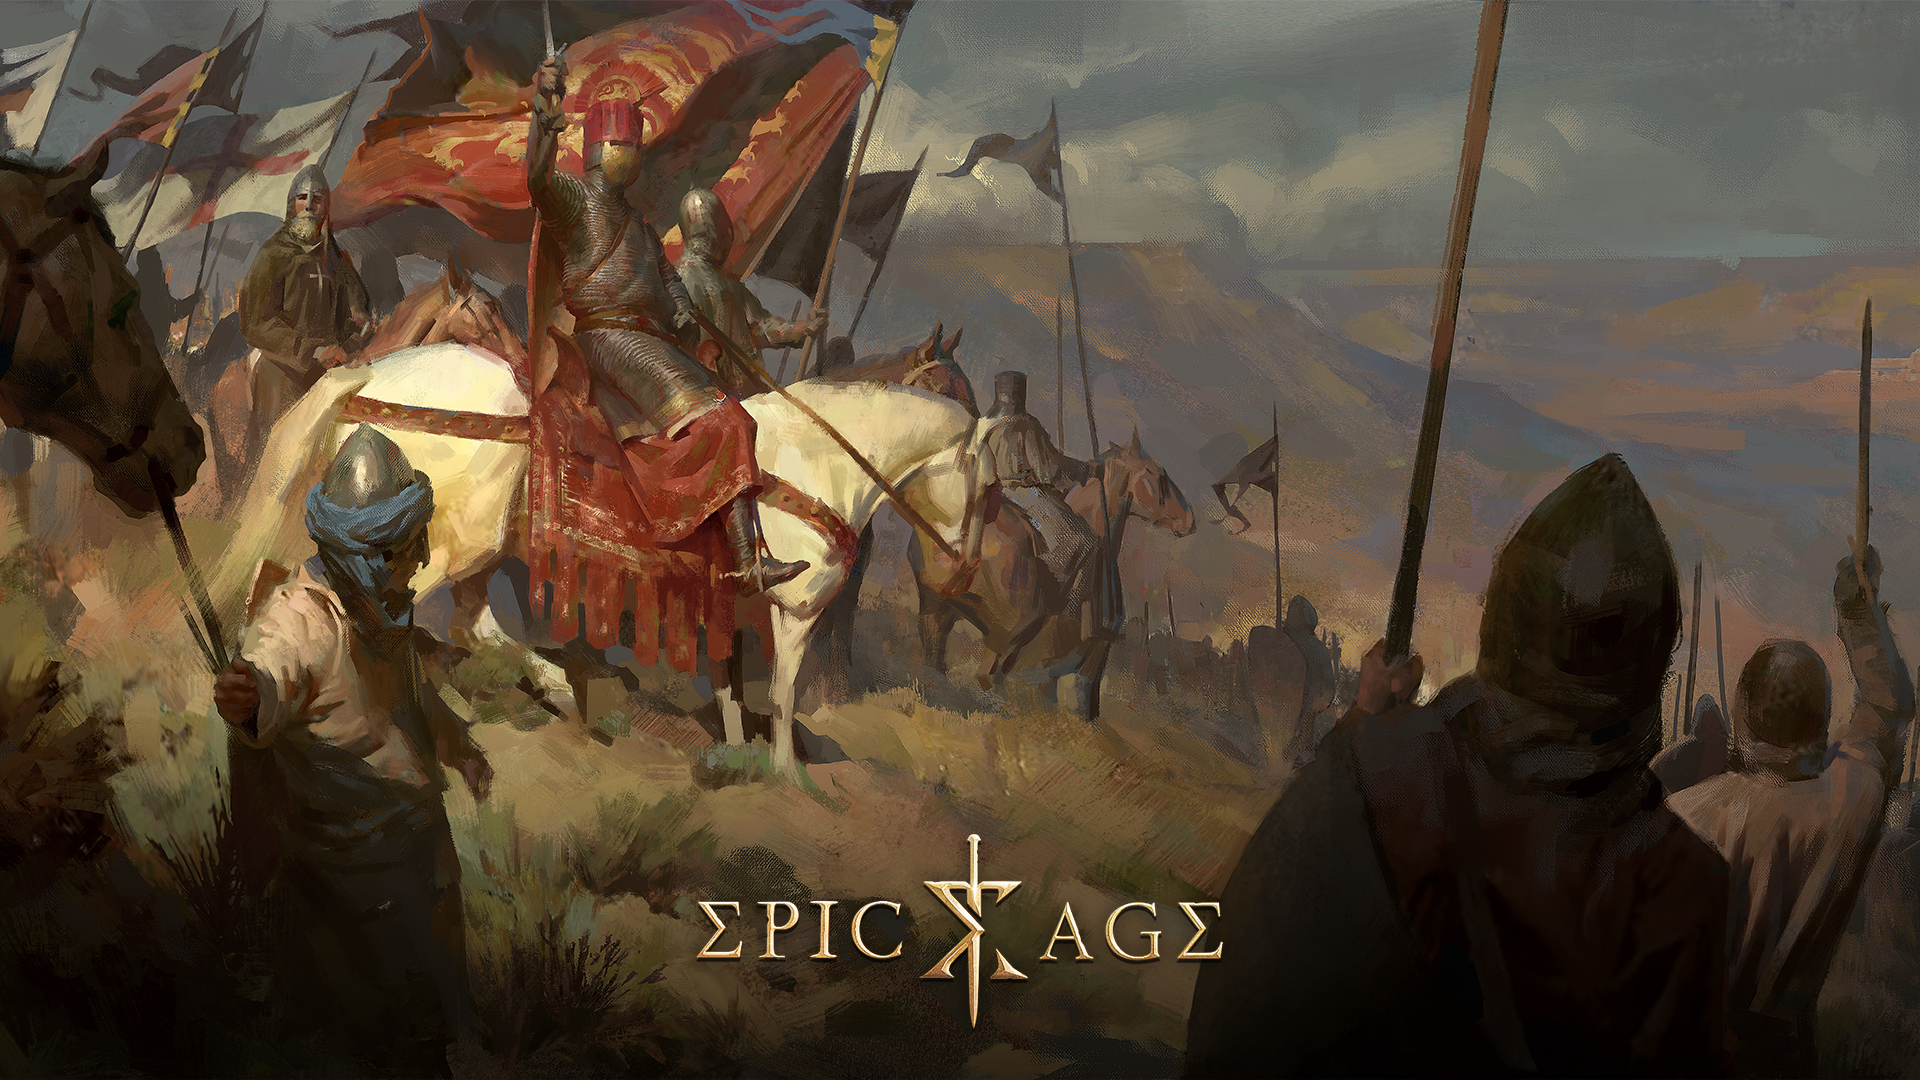 Check Out Epic Age, IGG’s Visually Impressive Strategy Game Starring 150+ Historical Heroes